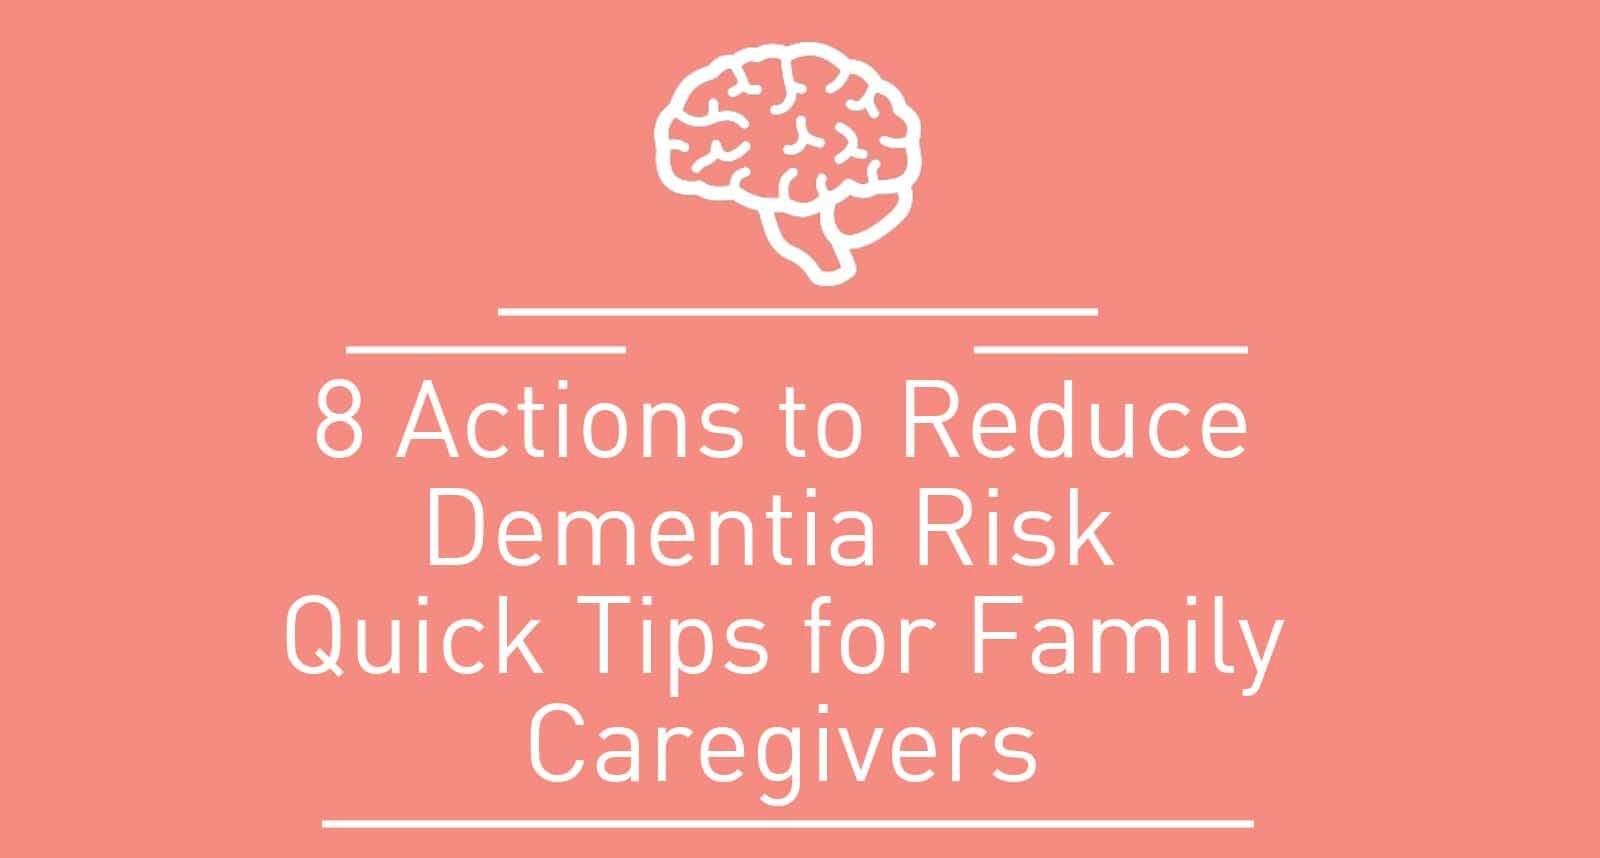 8 Actions to Reduce Dementia Risk [Infographic]